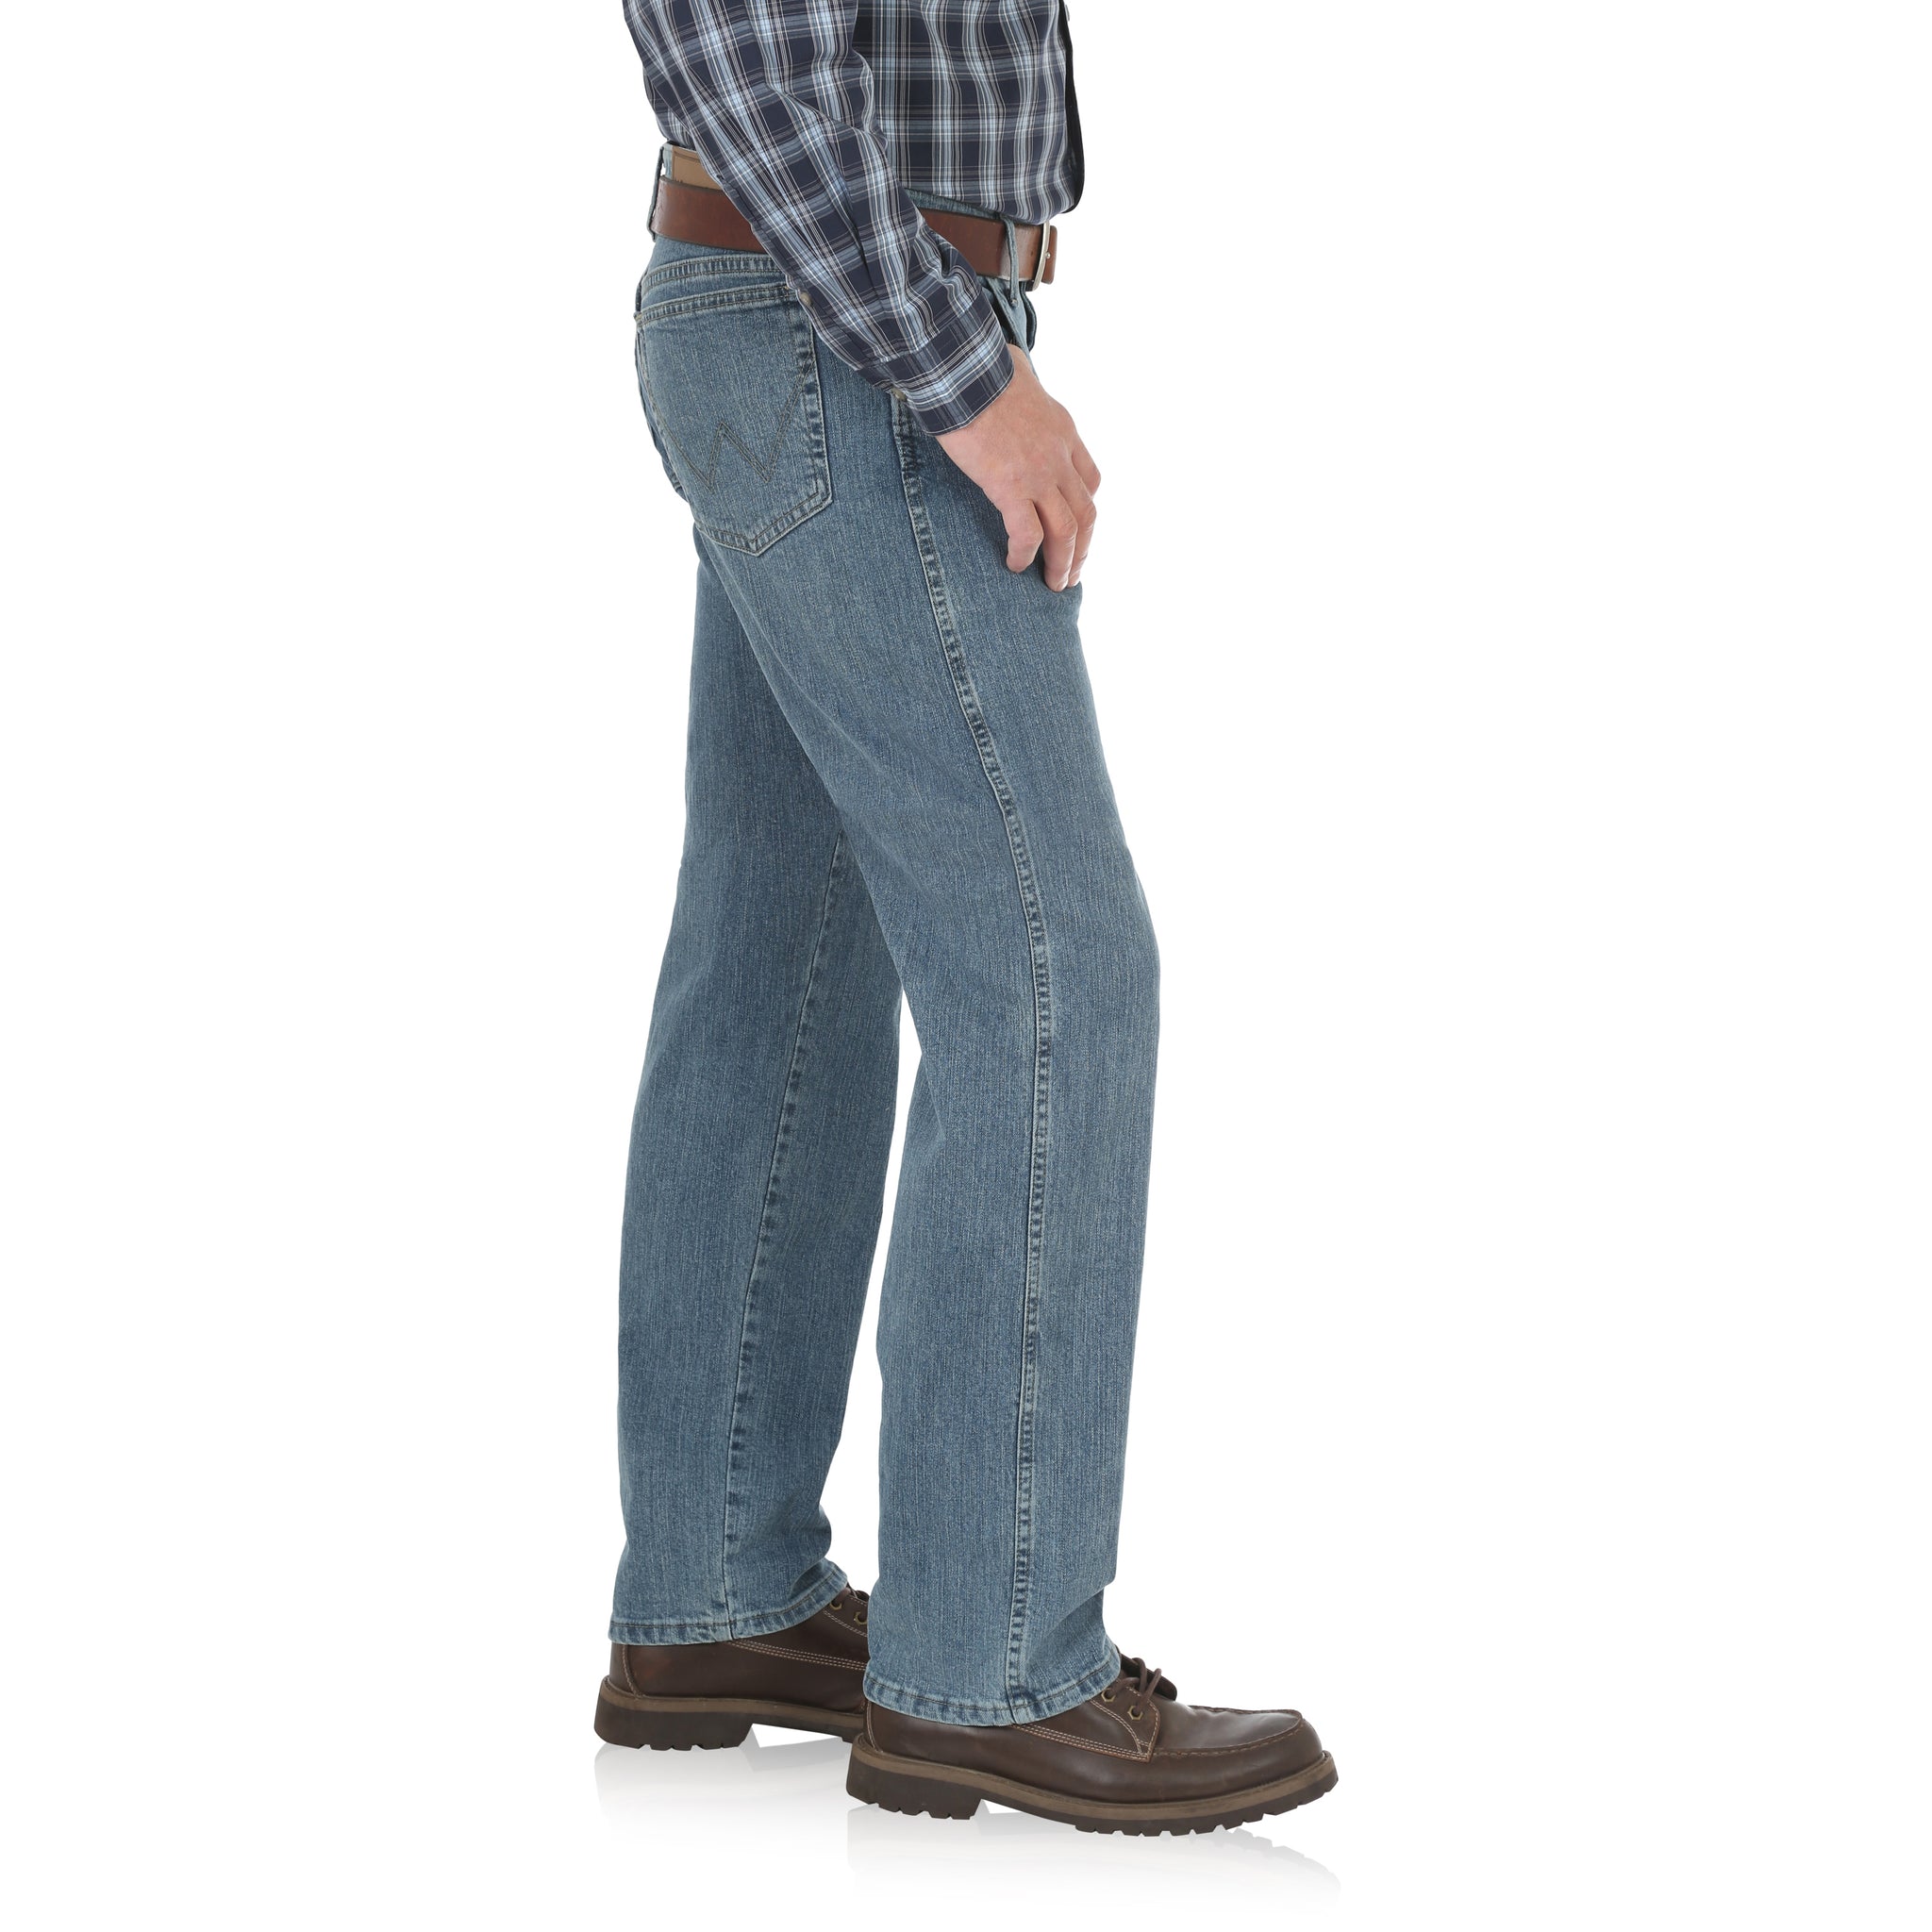 Wrangler Rugged Wear® Performance Series Relaxed Fit Jean Light Stone